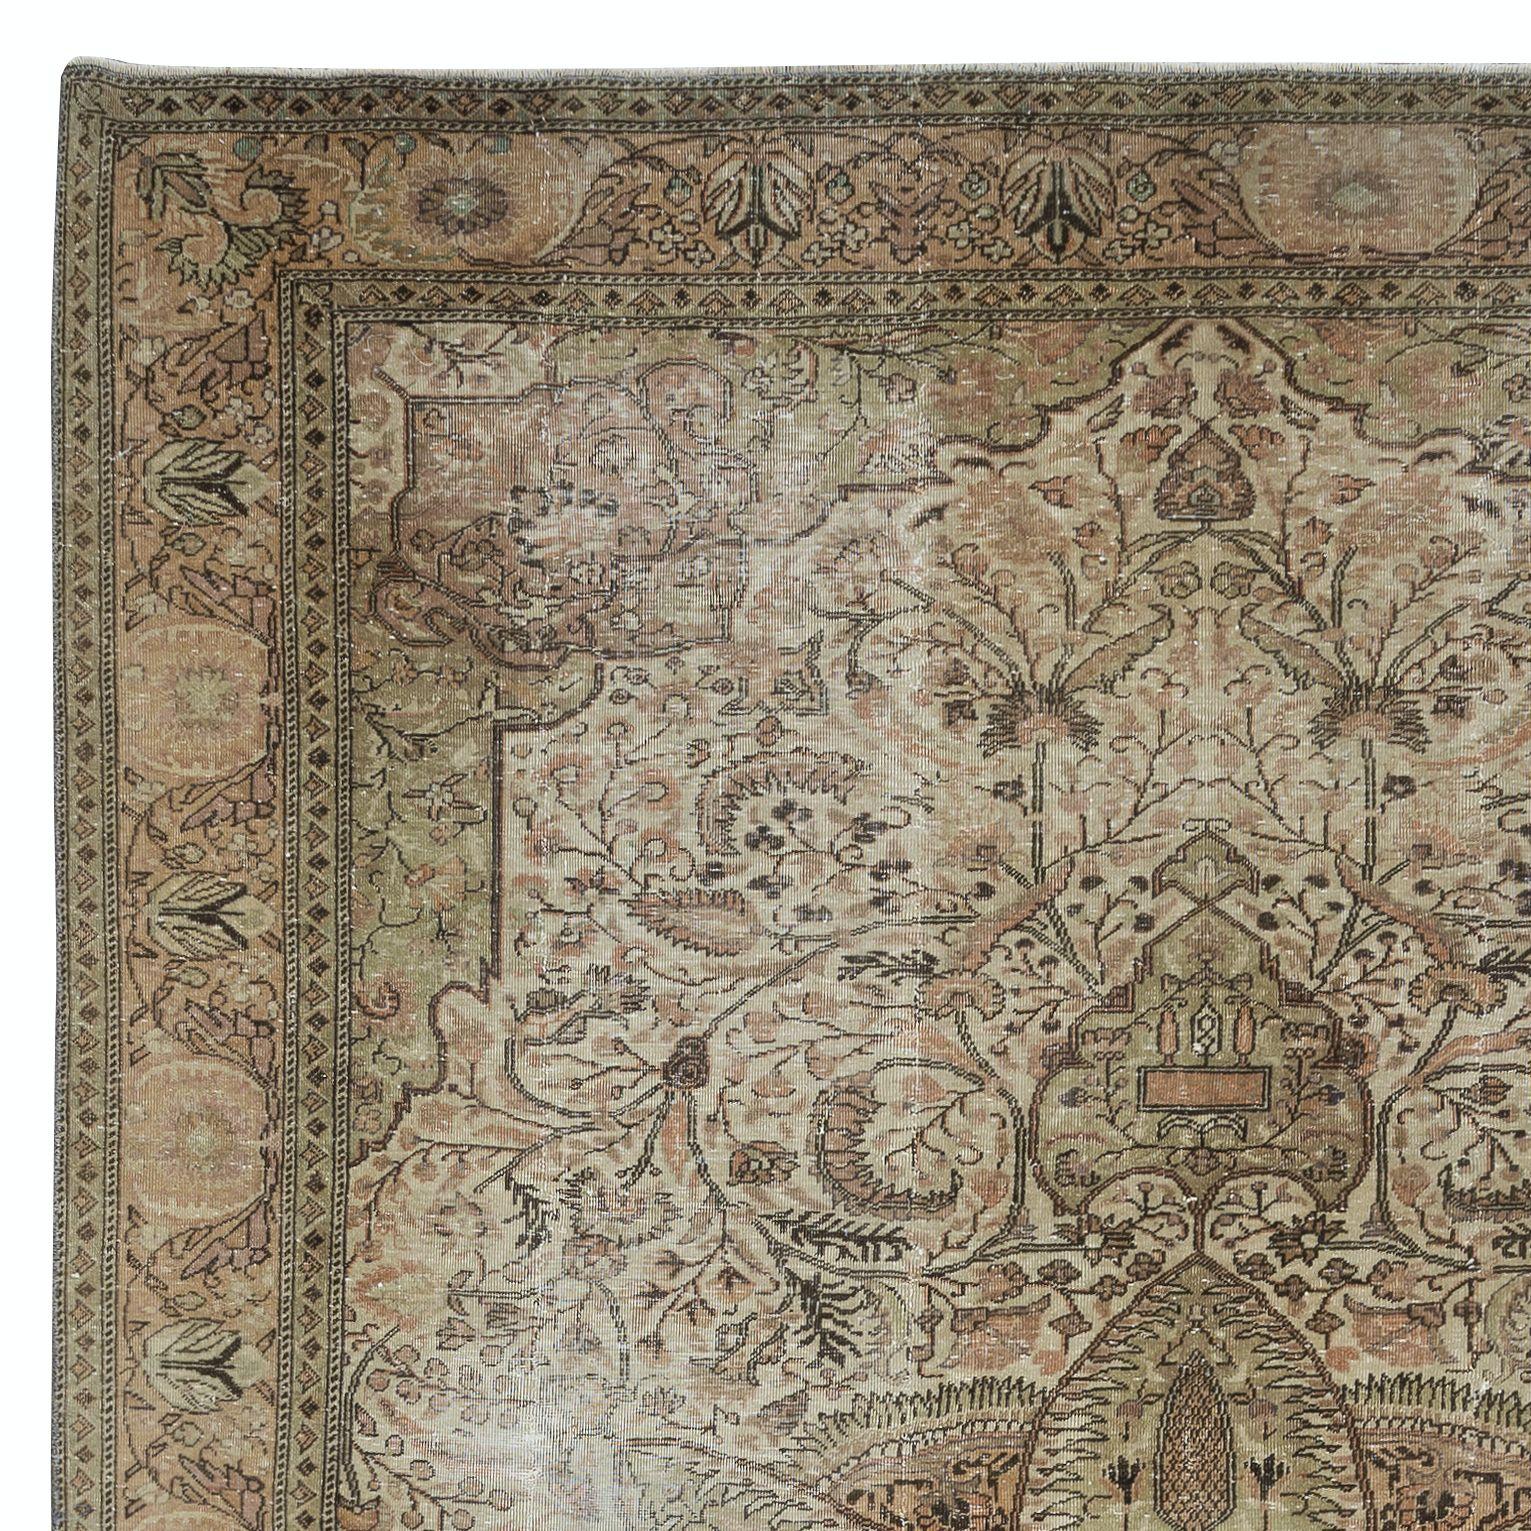 Turkish 7.5x11.6 Ft One of a Kind Vintage Wool Area Rug, Hand Knotted Anatolian Carpet For Sale